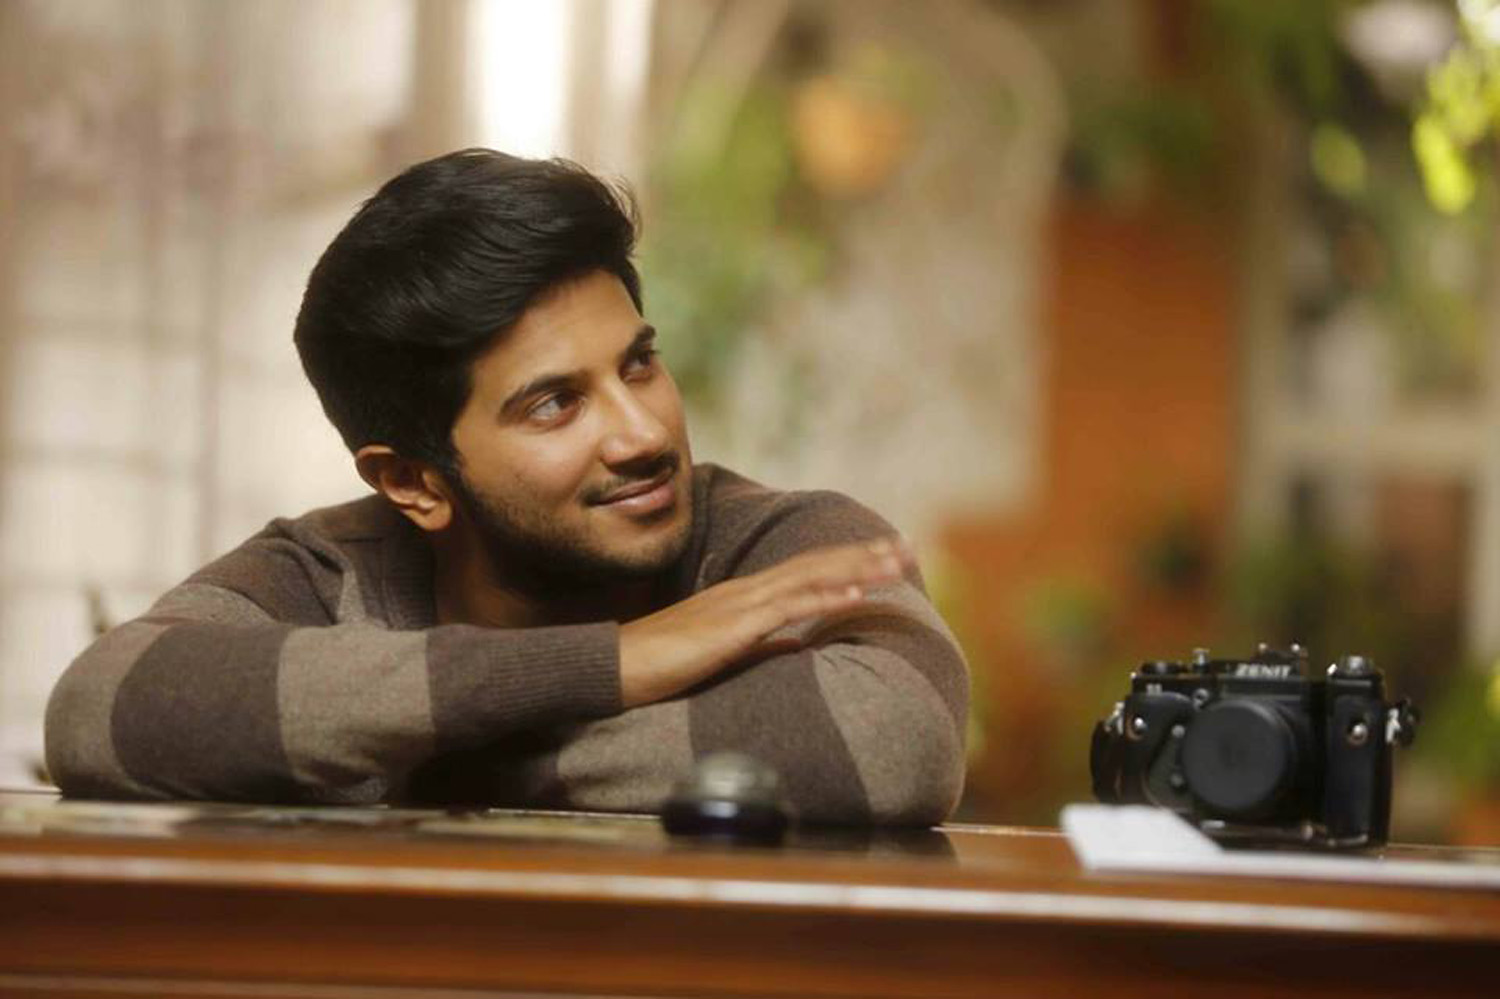 https://onlookersmedia.in/wp-content/uploads/2015/03/100-Days-Of-Love-Stills-Photos-Images-Dulquer-Salmaan-Nithya-Menon-Malayalam-Movies-2015-Onlookers-Media-1.jpg